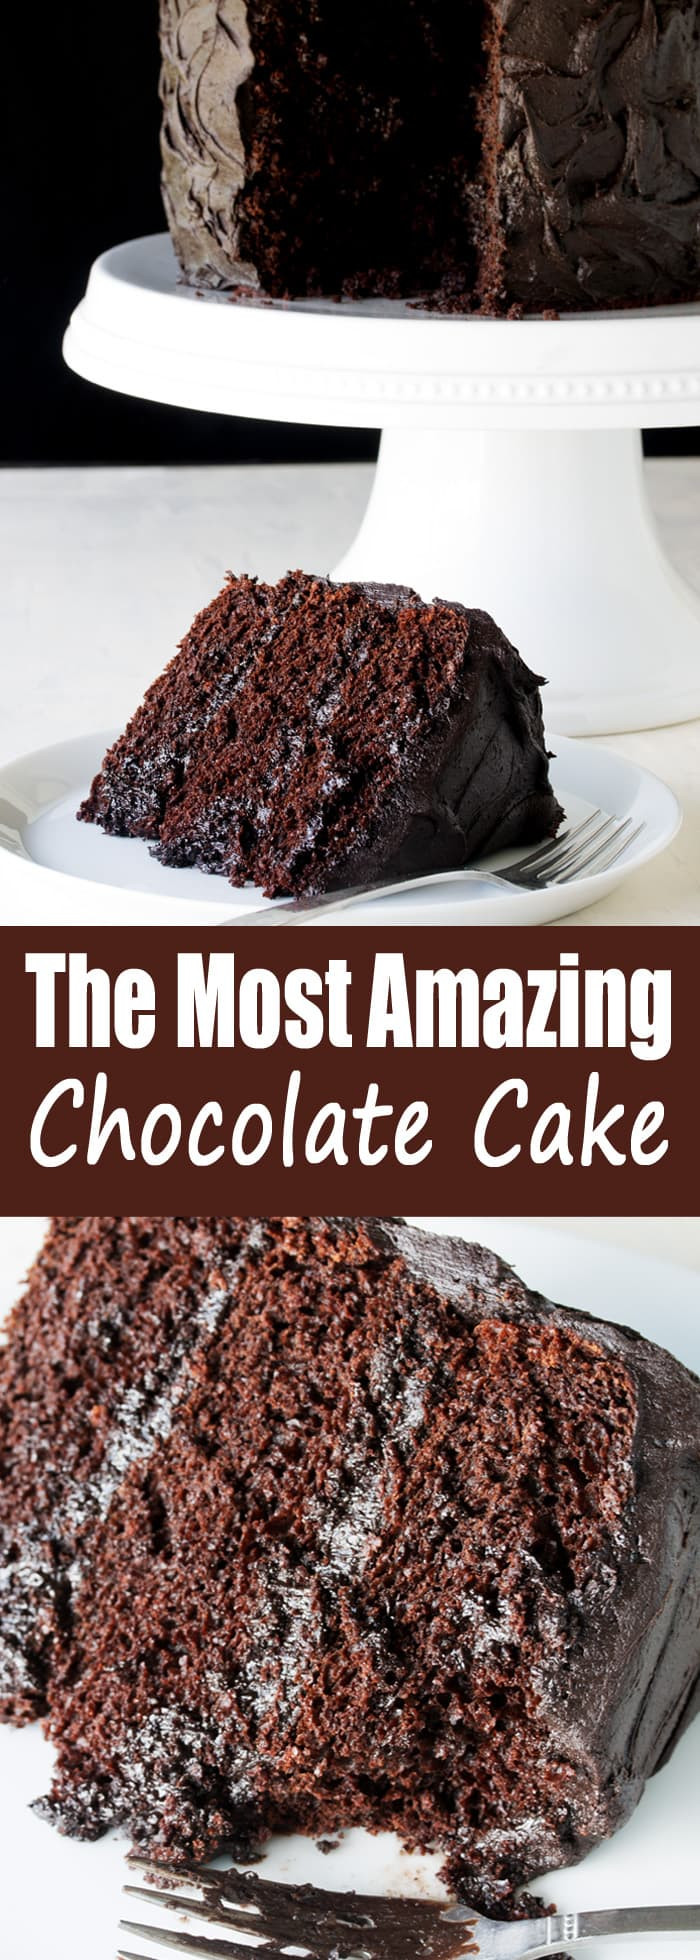 The Most Amazing Chocolate Cake
 The Most Amazing Chocolate Cake Recipe thestayathomechef